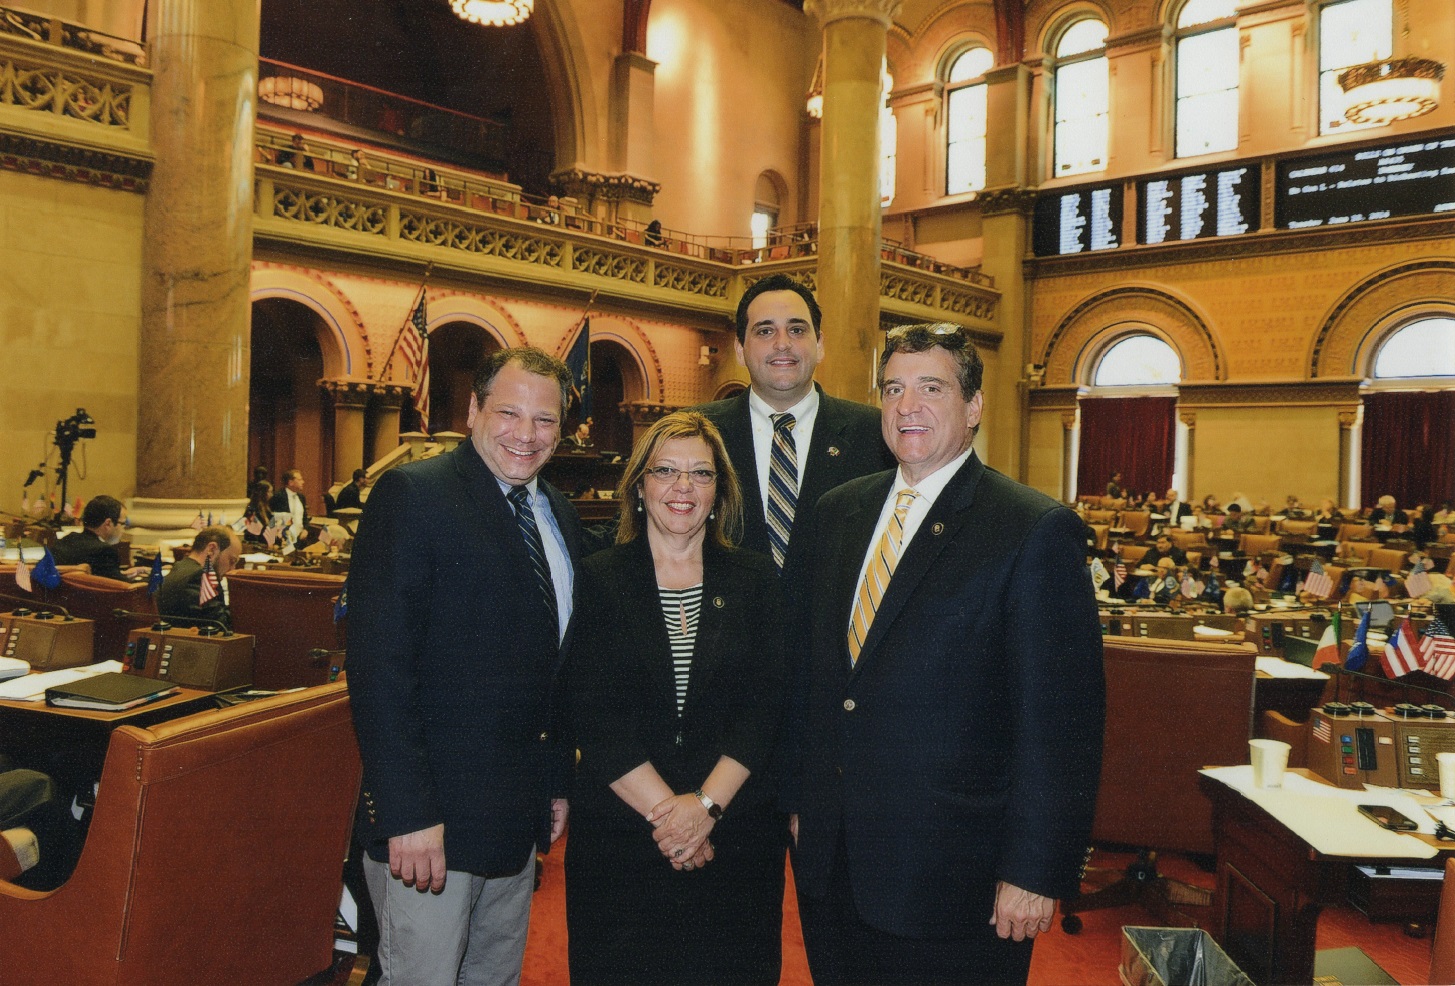   Assemblyman Chad Lupinacci meeting with Governor Andrew Cuomo in January 2015 at the start of his second term in the state assembly.  